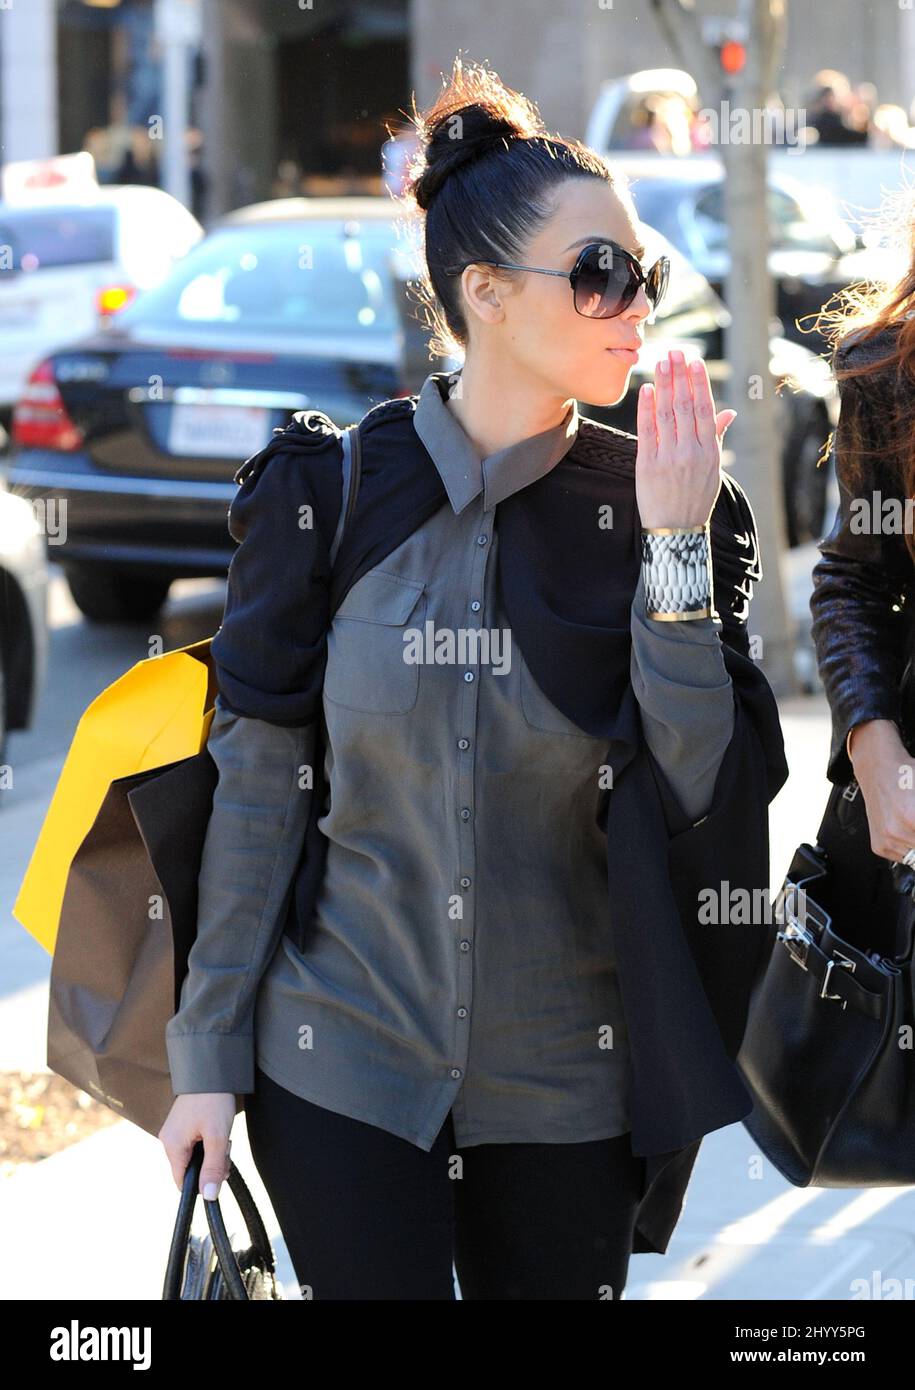 Kim Kardashian shopping at the Chanel store on Rodeo Drive, Beverly Hills,  Los Angeles Stock Photo - Alamy